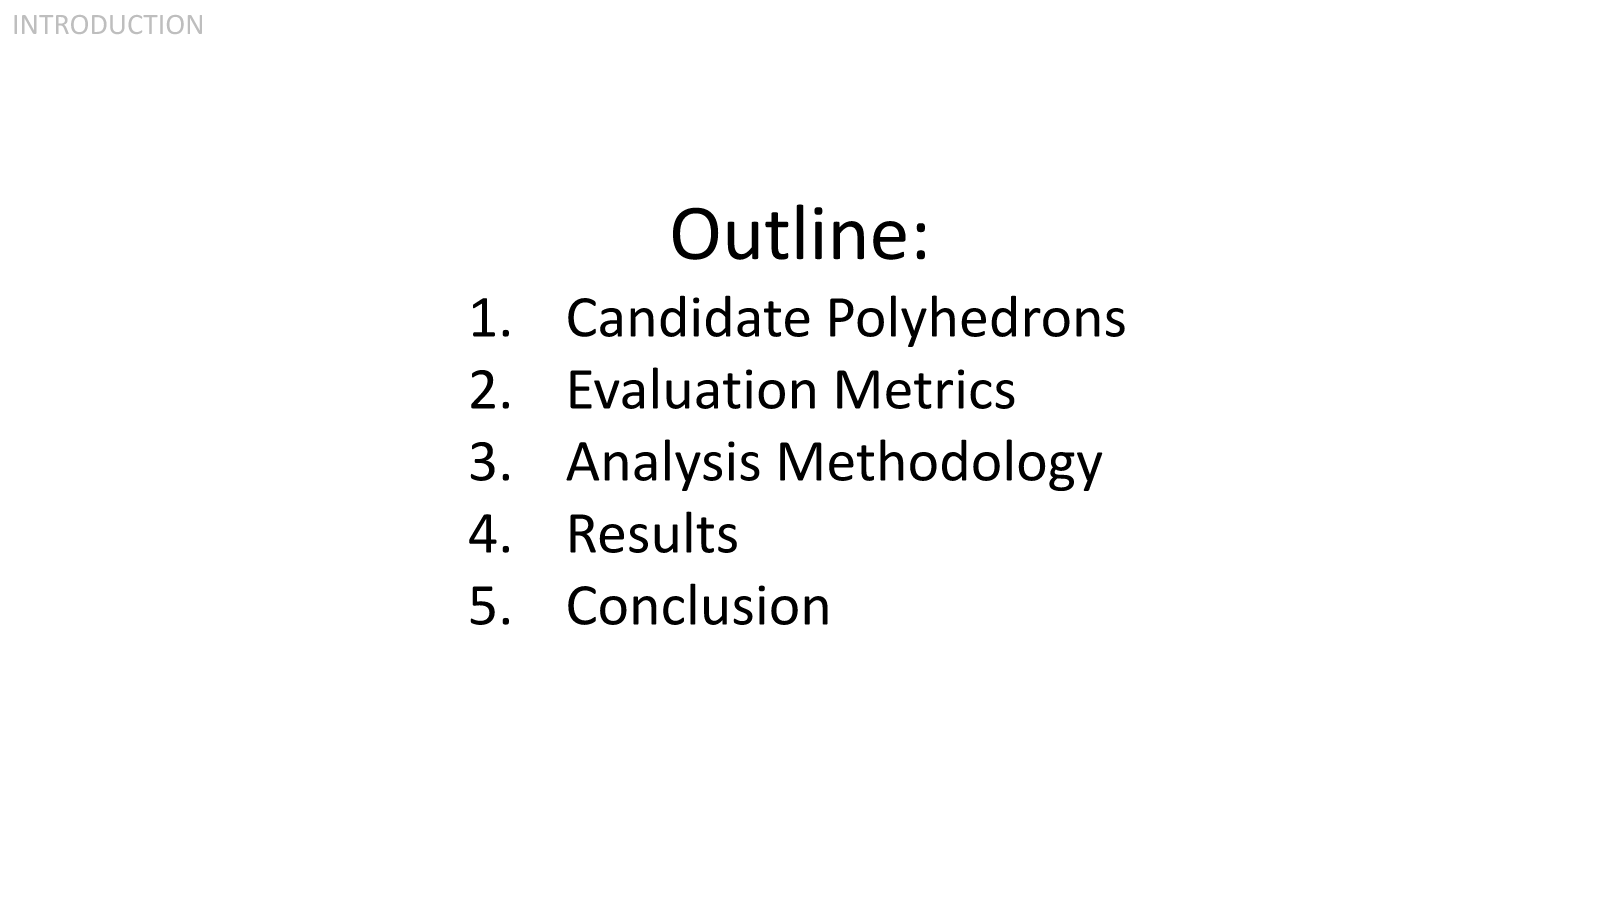  In this presentation, I will be covering which candidate polyhedra were selected, which metrics were used to evaluate the candidate polyhedra, what analysis methodology was used to process the raw metric values, and finally I will be presenting the 